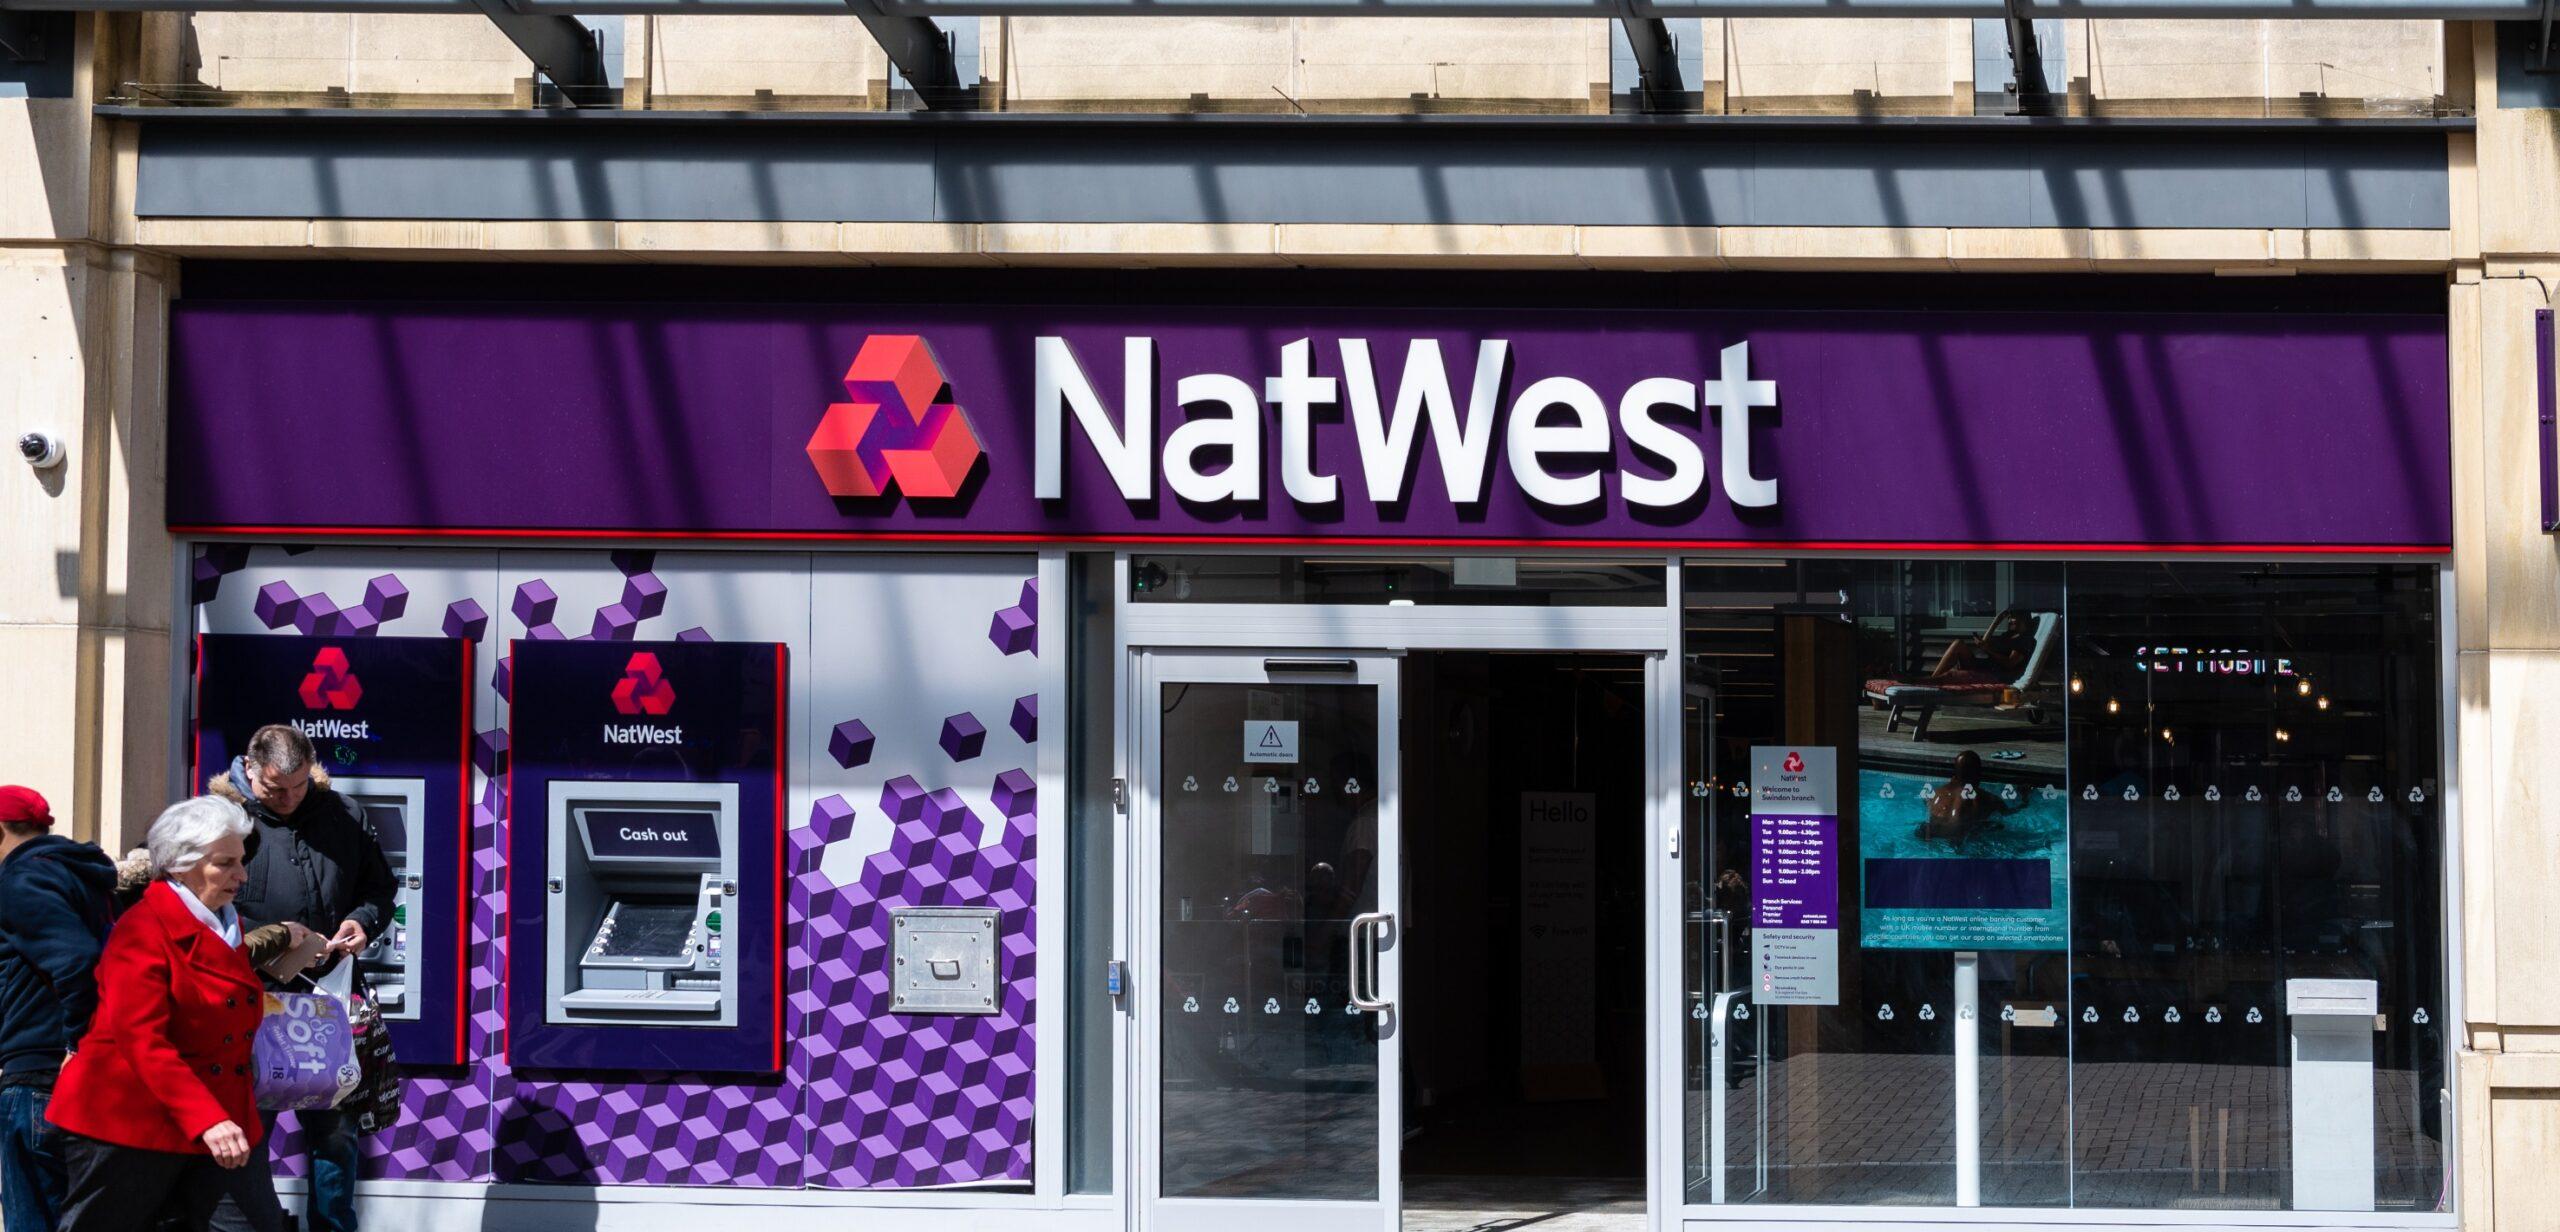 NatWest Share Price Drags FTSE 100 Index as Heavyweights Spark Contagion Fears